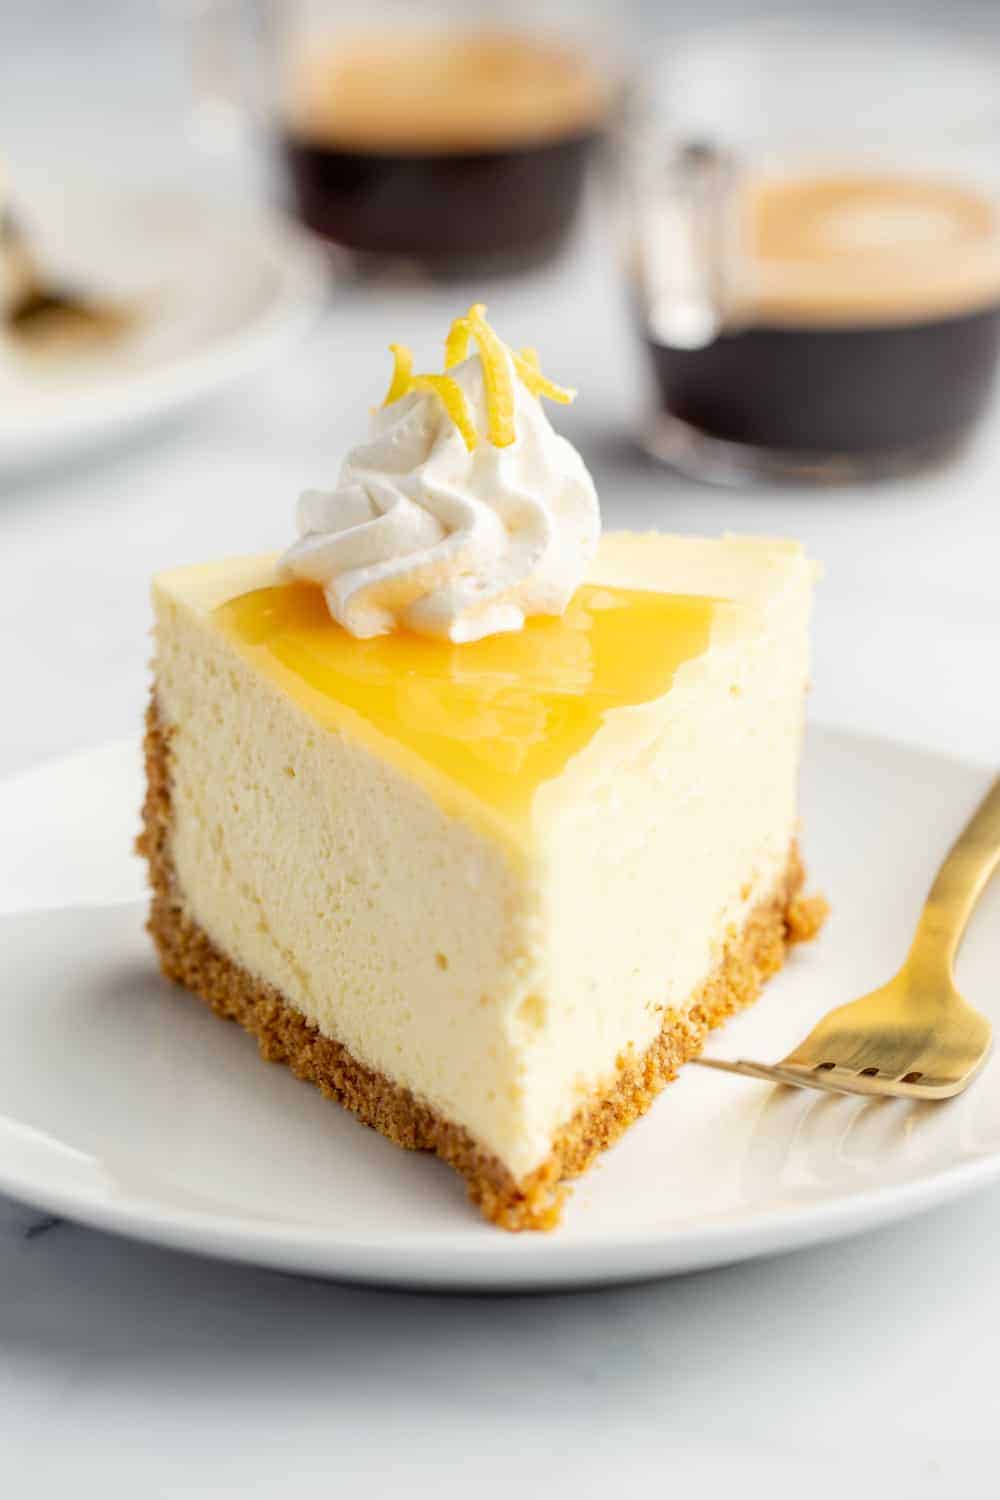 Guide to Adjusting Cheesecake Sizes - Life Love and Sugar